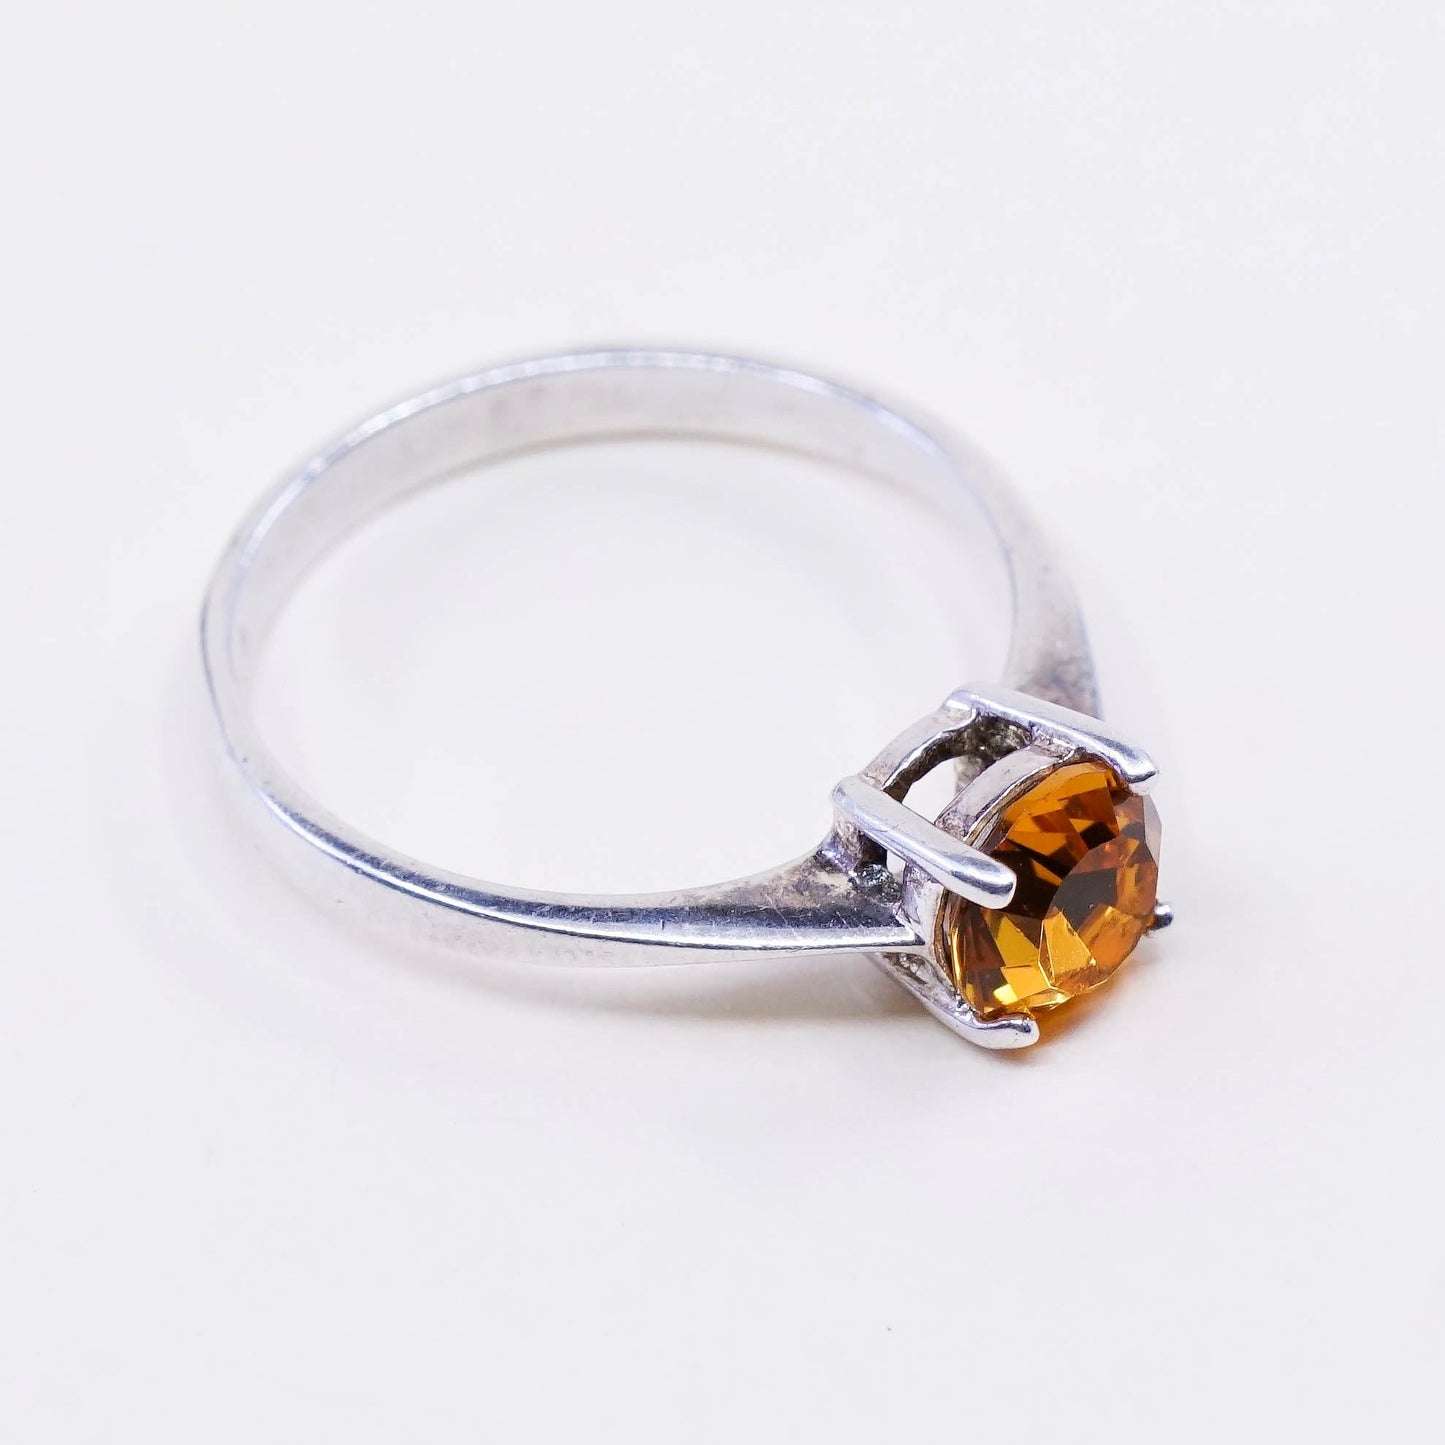 Size 7, vintage Sterling silver handmade ring, stackable 925 with citrine